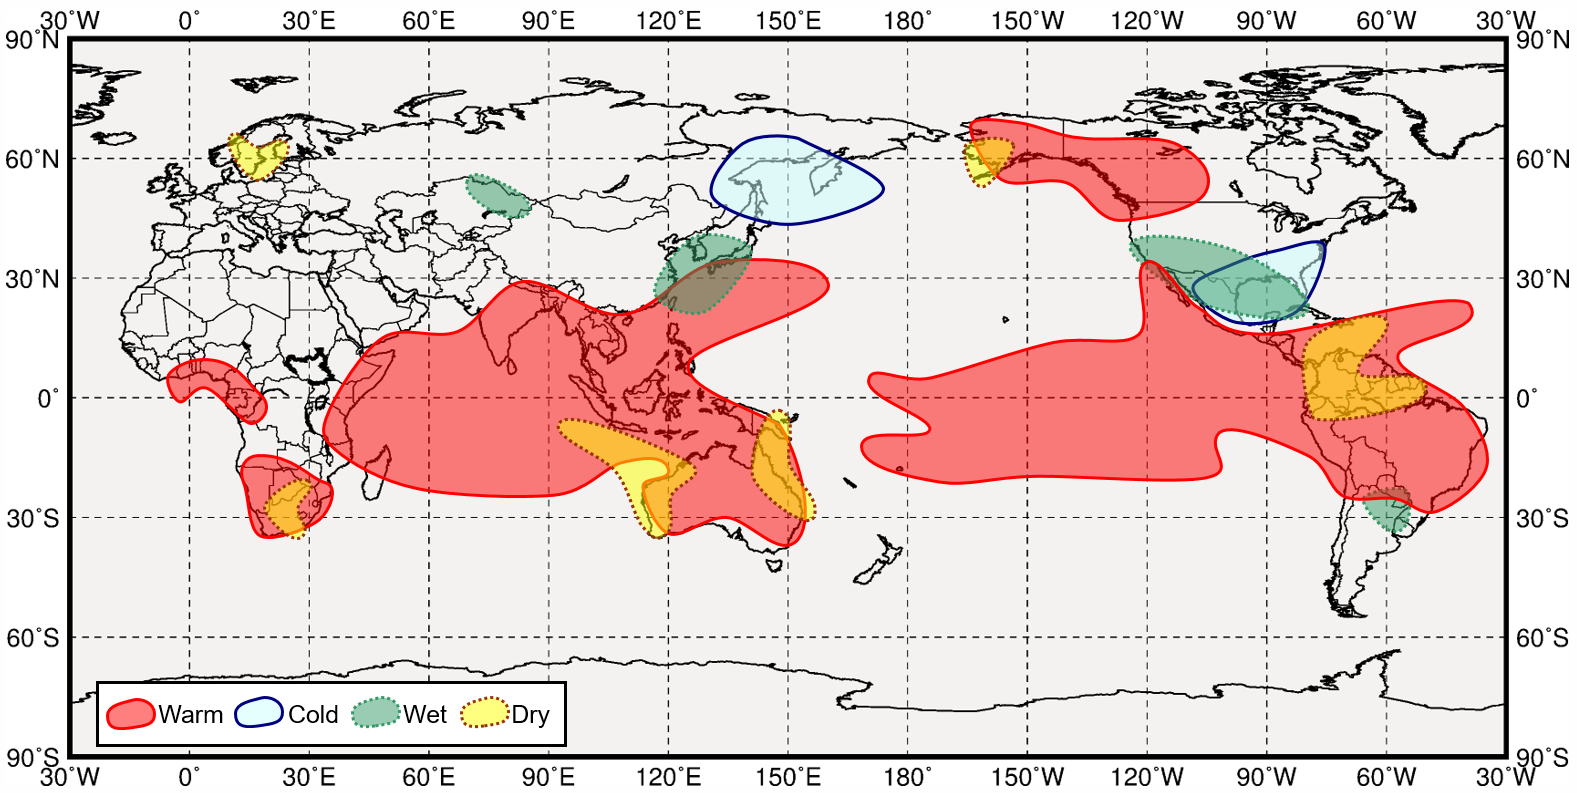 Global impacts associated with El Niño events